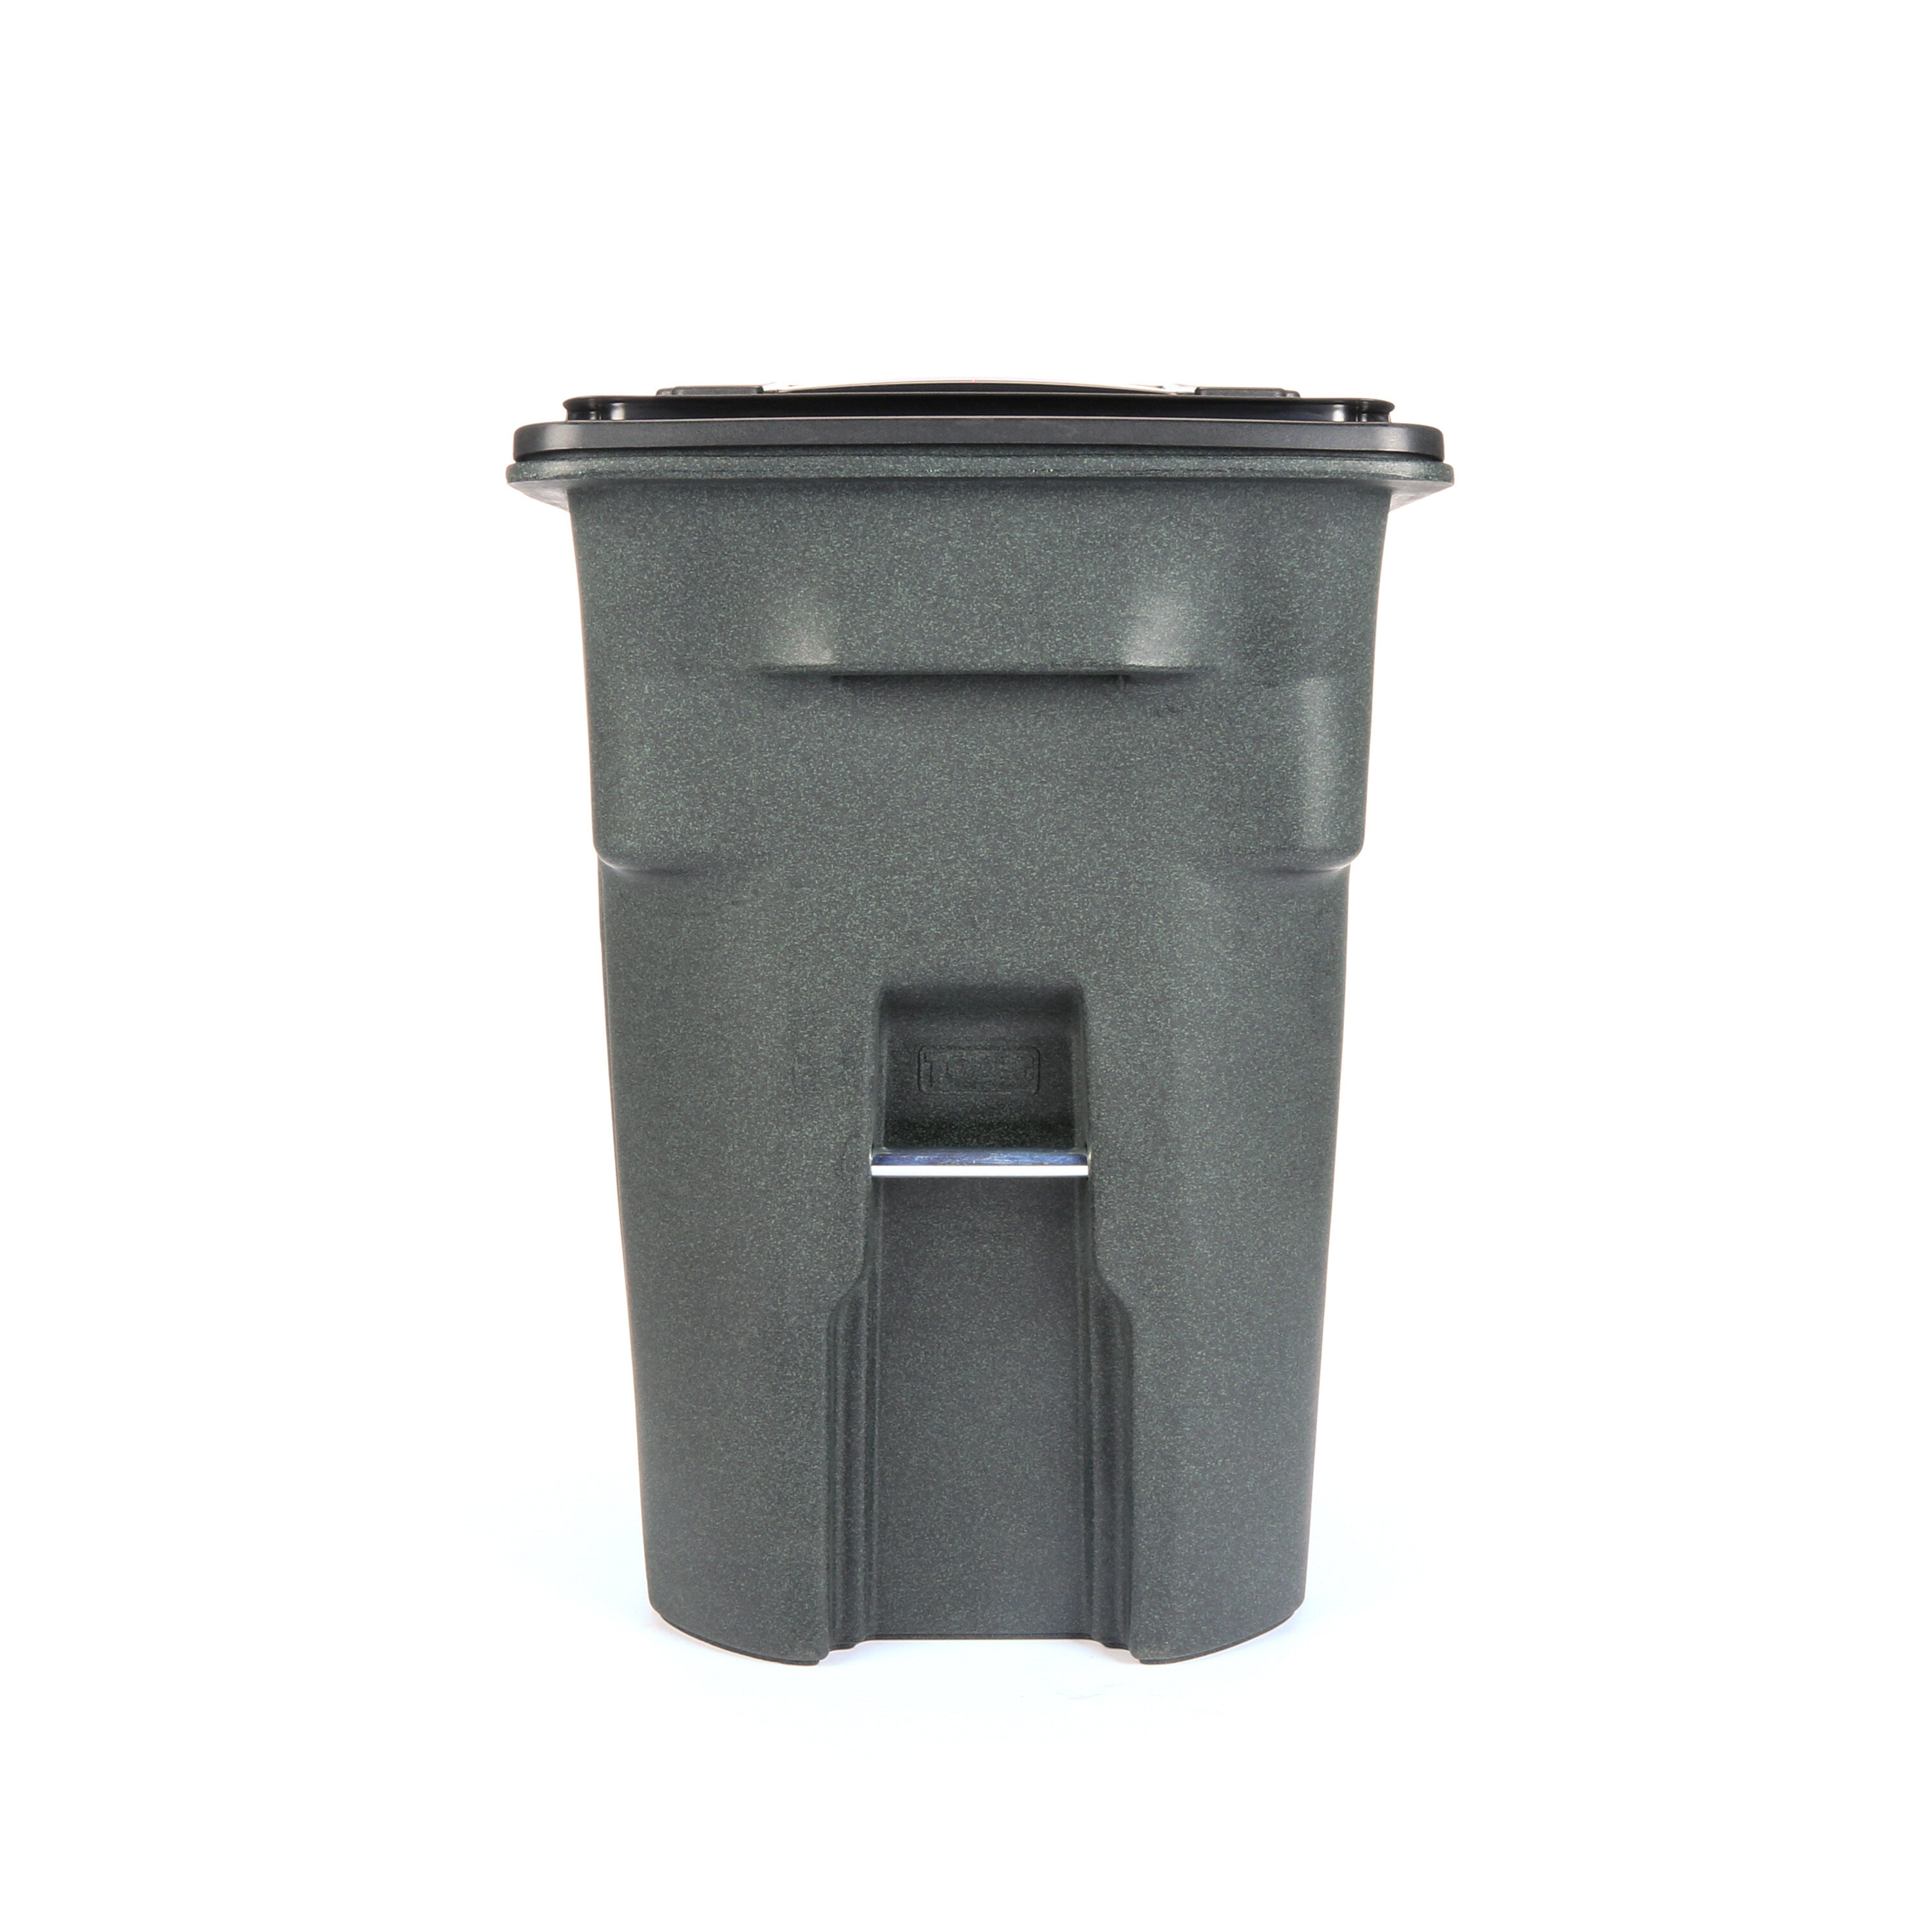 Toter 96 Gallon Black Rolling Outdoor Garbage/Trash Can with